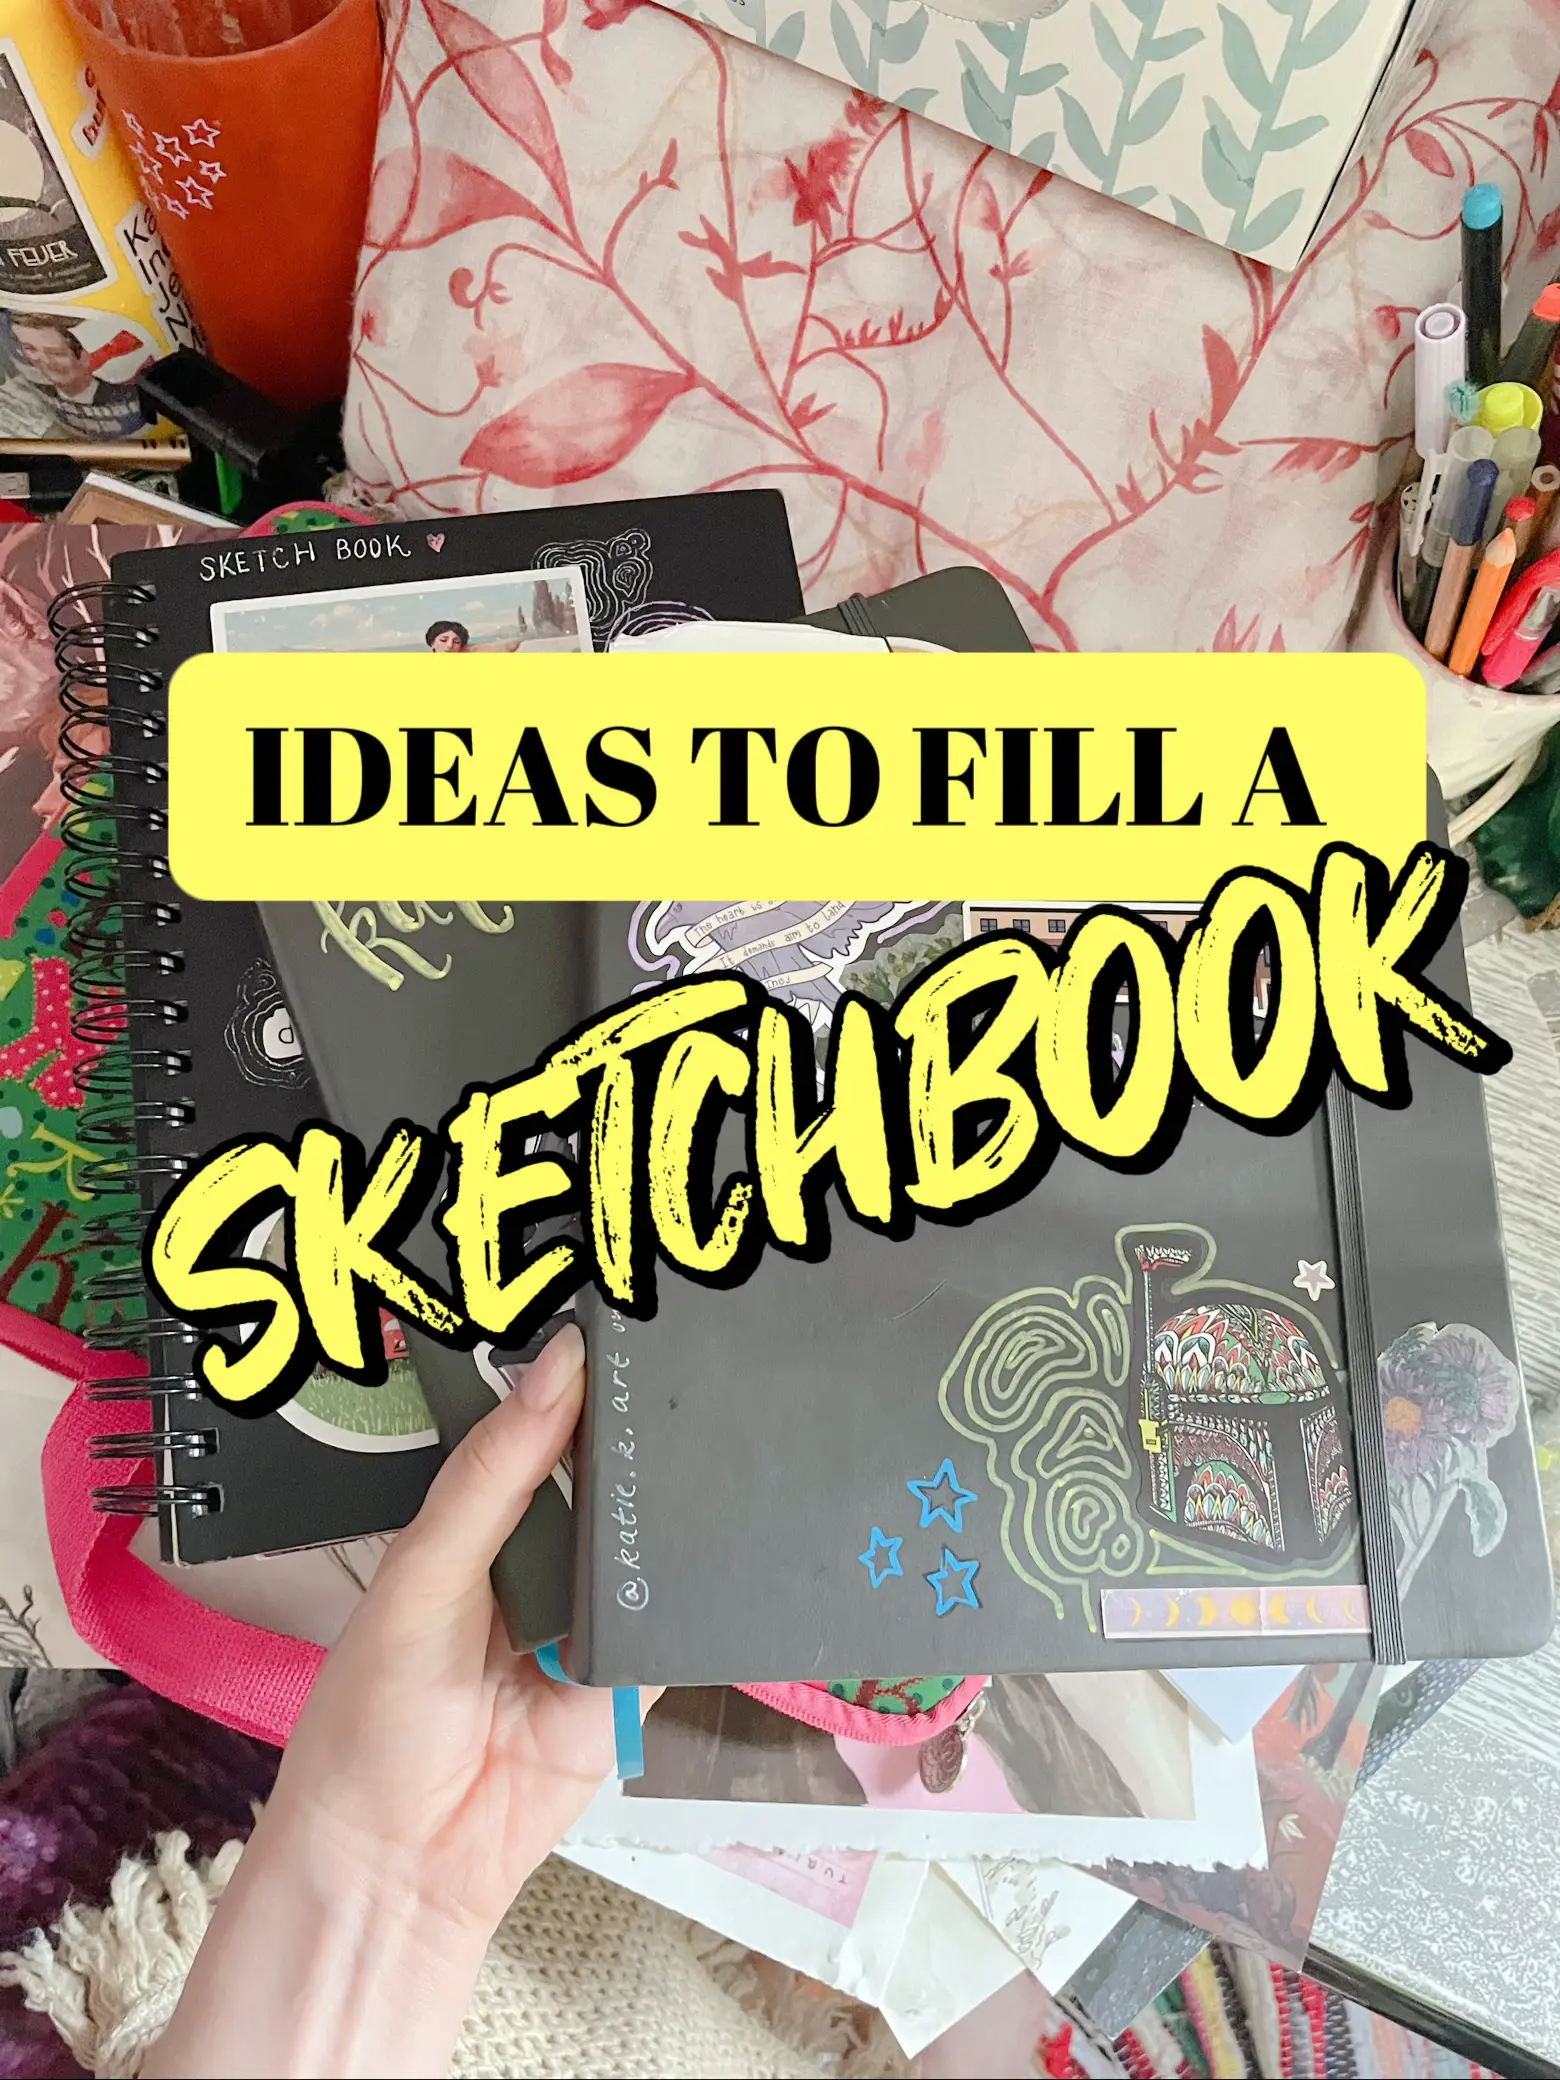 Big Book of Ideas to Sketch Drawing Book, Sketchbook Filled With